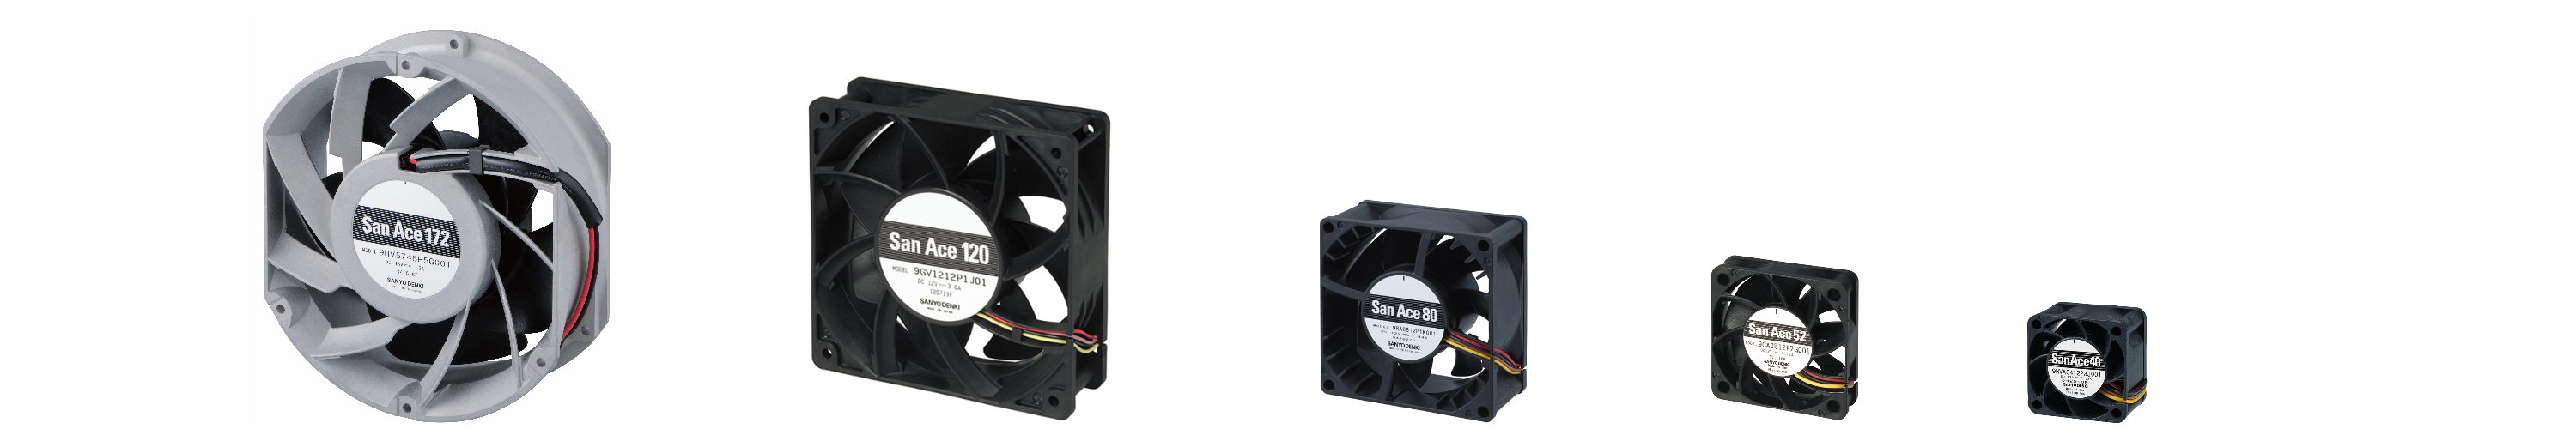 DC Axial Fans Standard Image